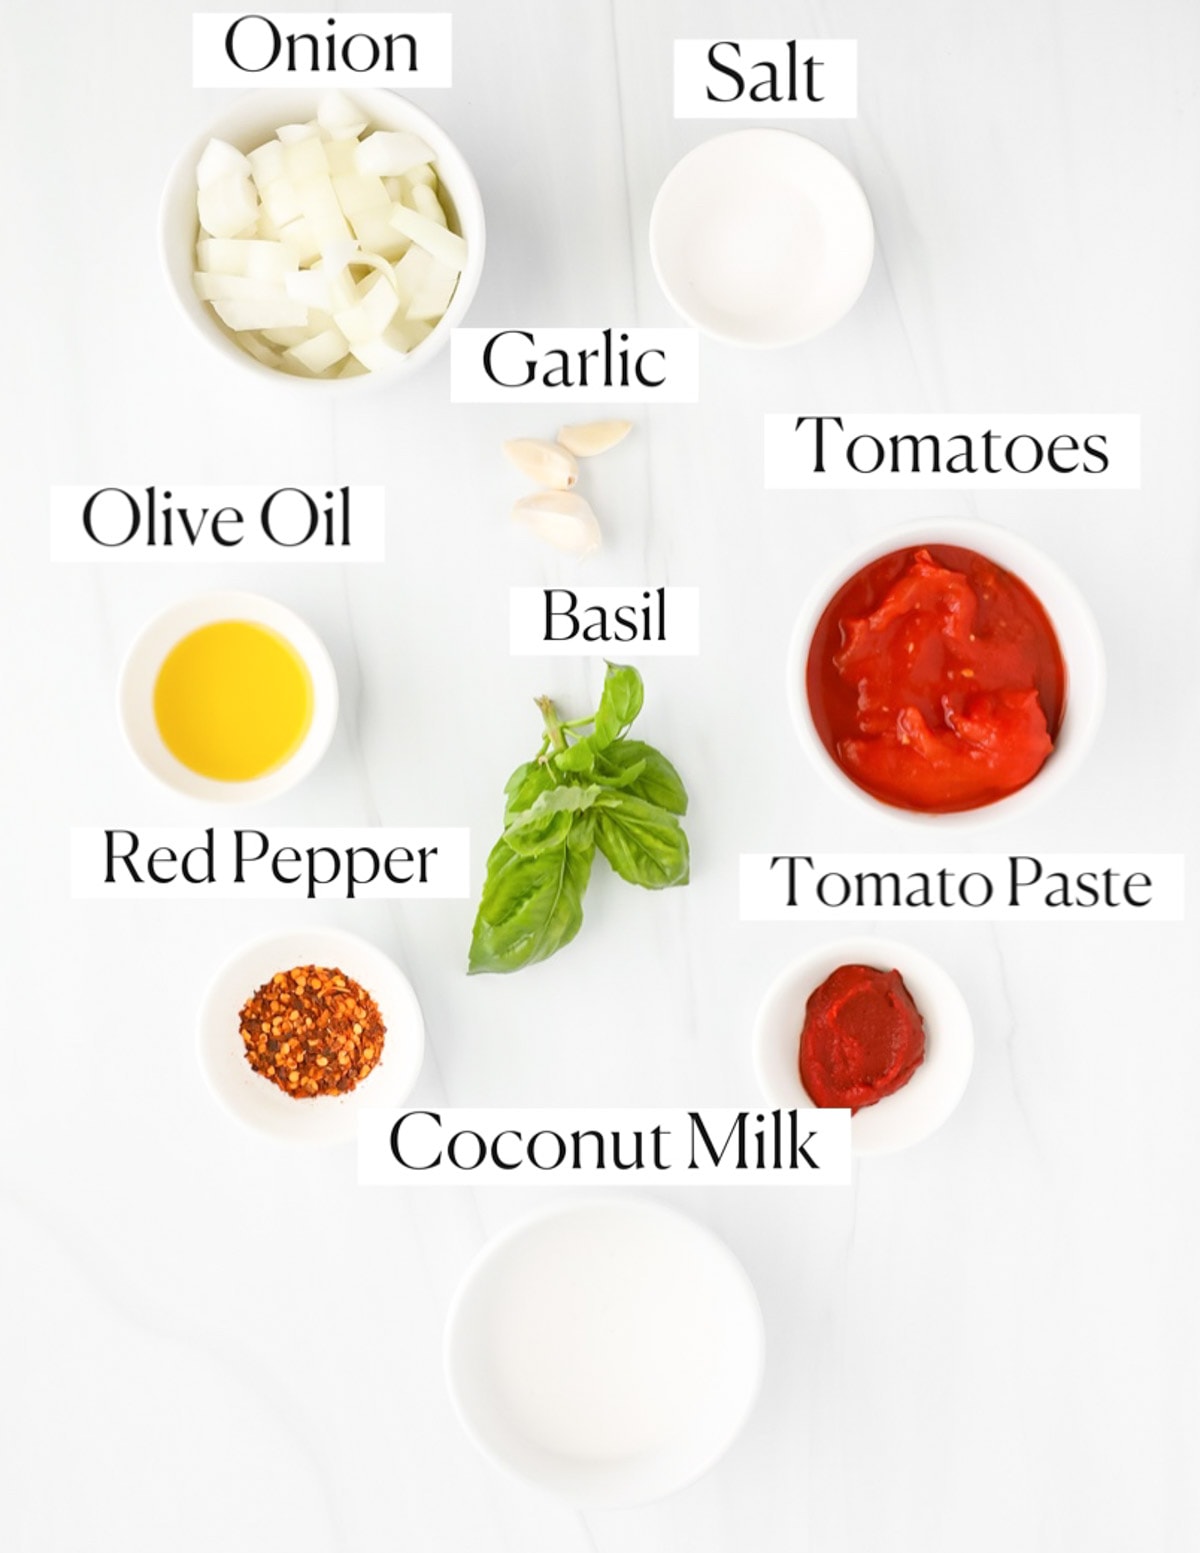 Labeled ingredients in small white bowls including: onion, salt, garlic, olive oil, tomatoes, basil, red pepper, tomato paste, and coconut milk.